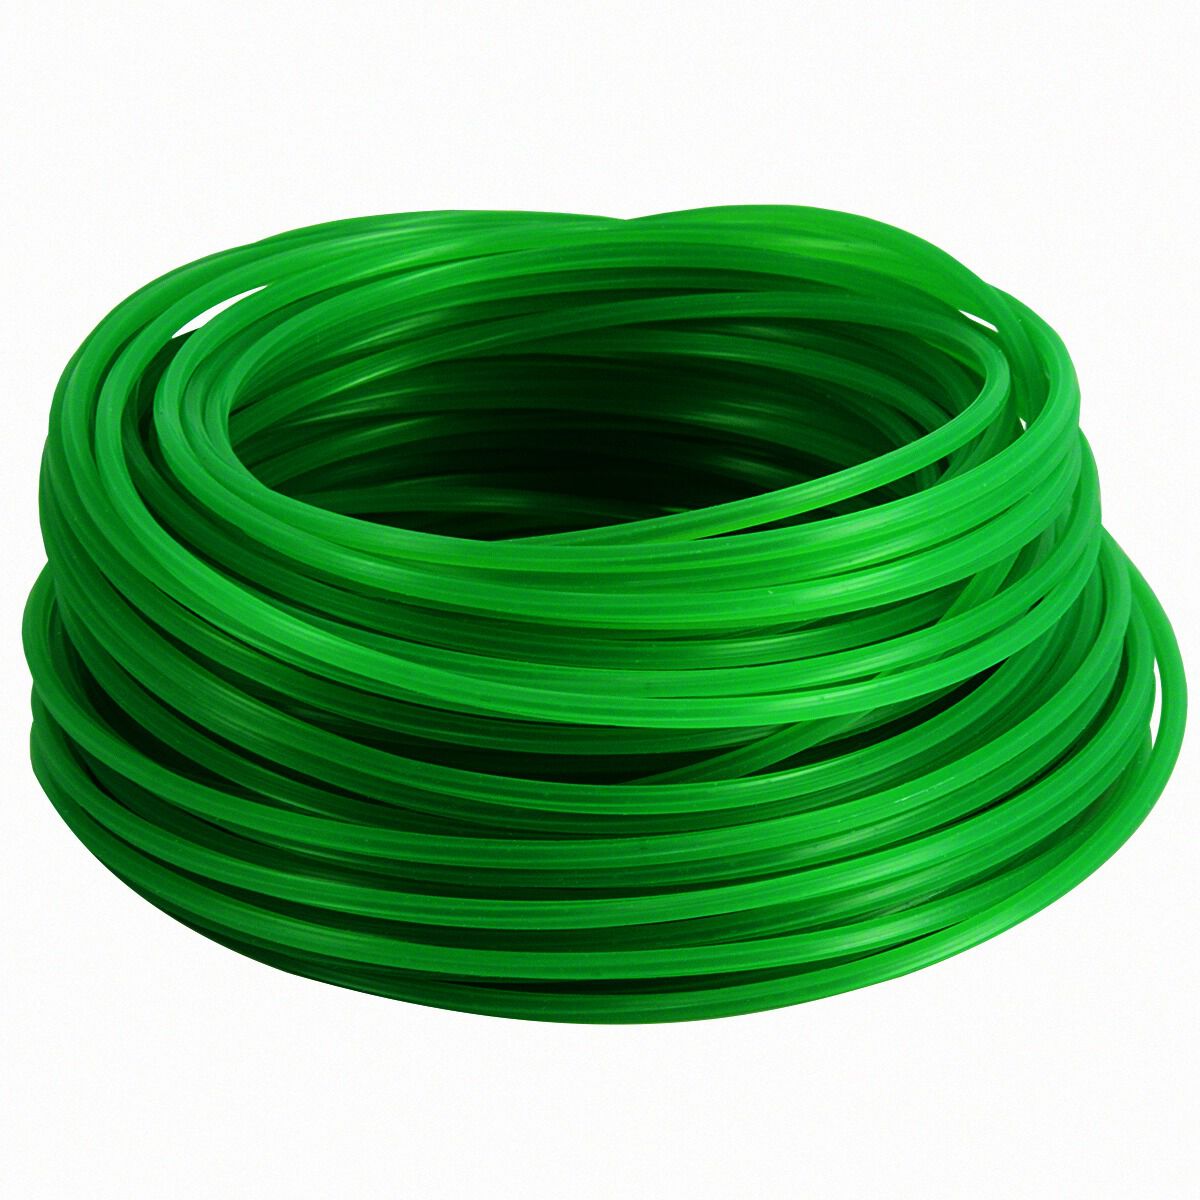 2mm X 15M HEAVY DUTY TWIST STRIMMER LINE FOR PETROL STRIMMERS WIRE CORD 